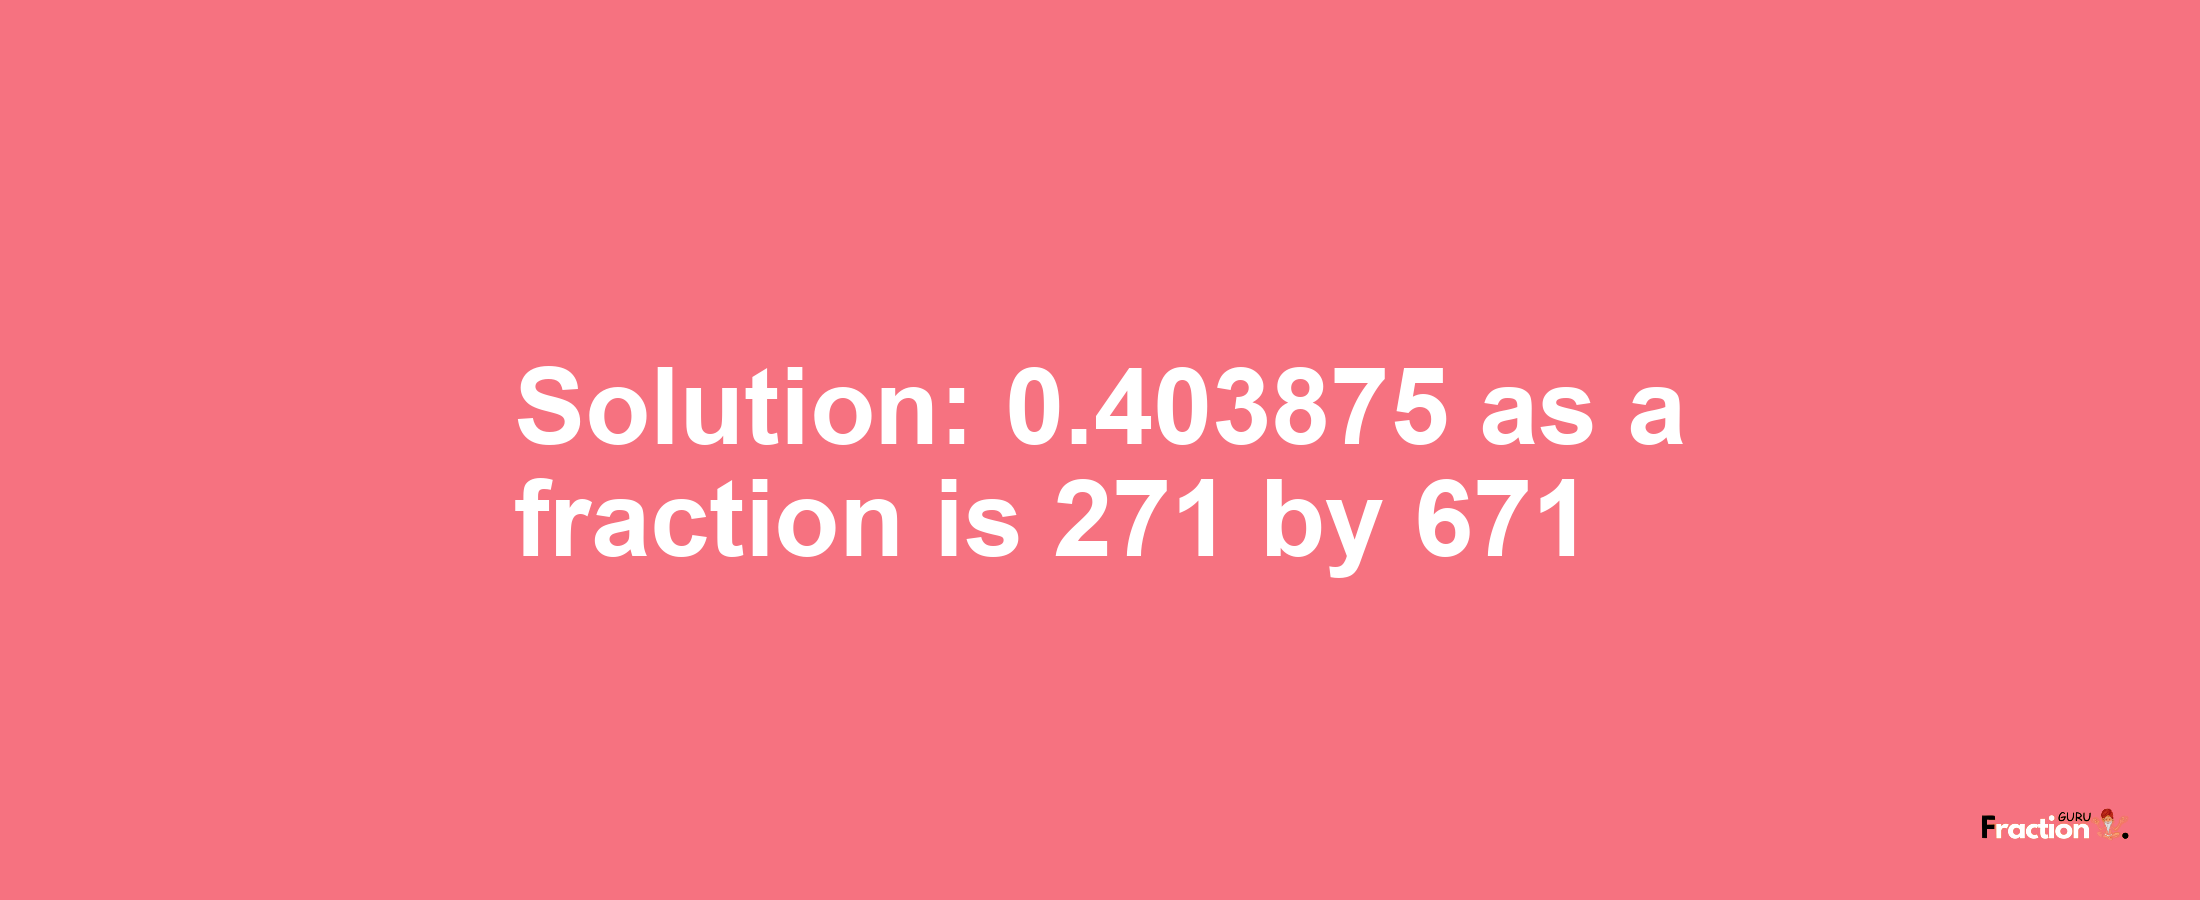 Solution:0.403875 as a fraction is 271/671